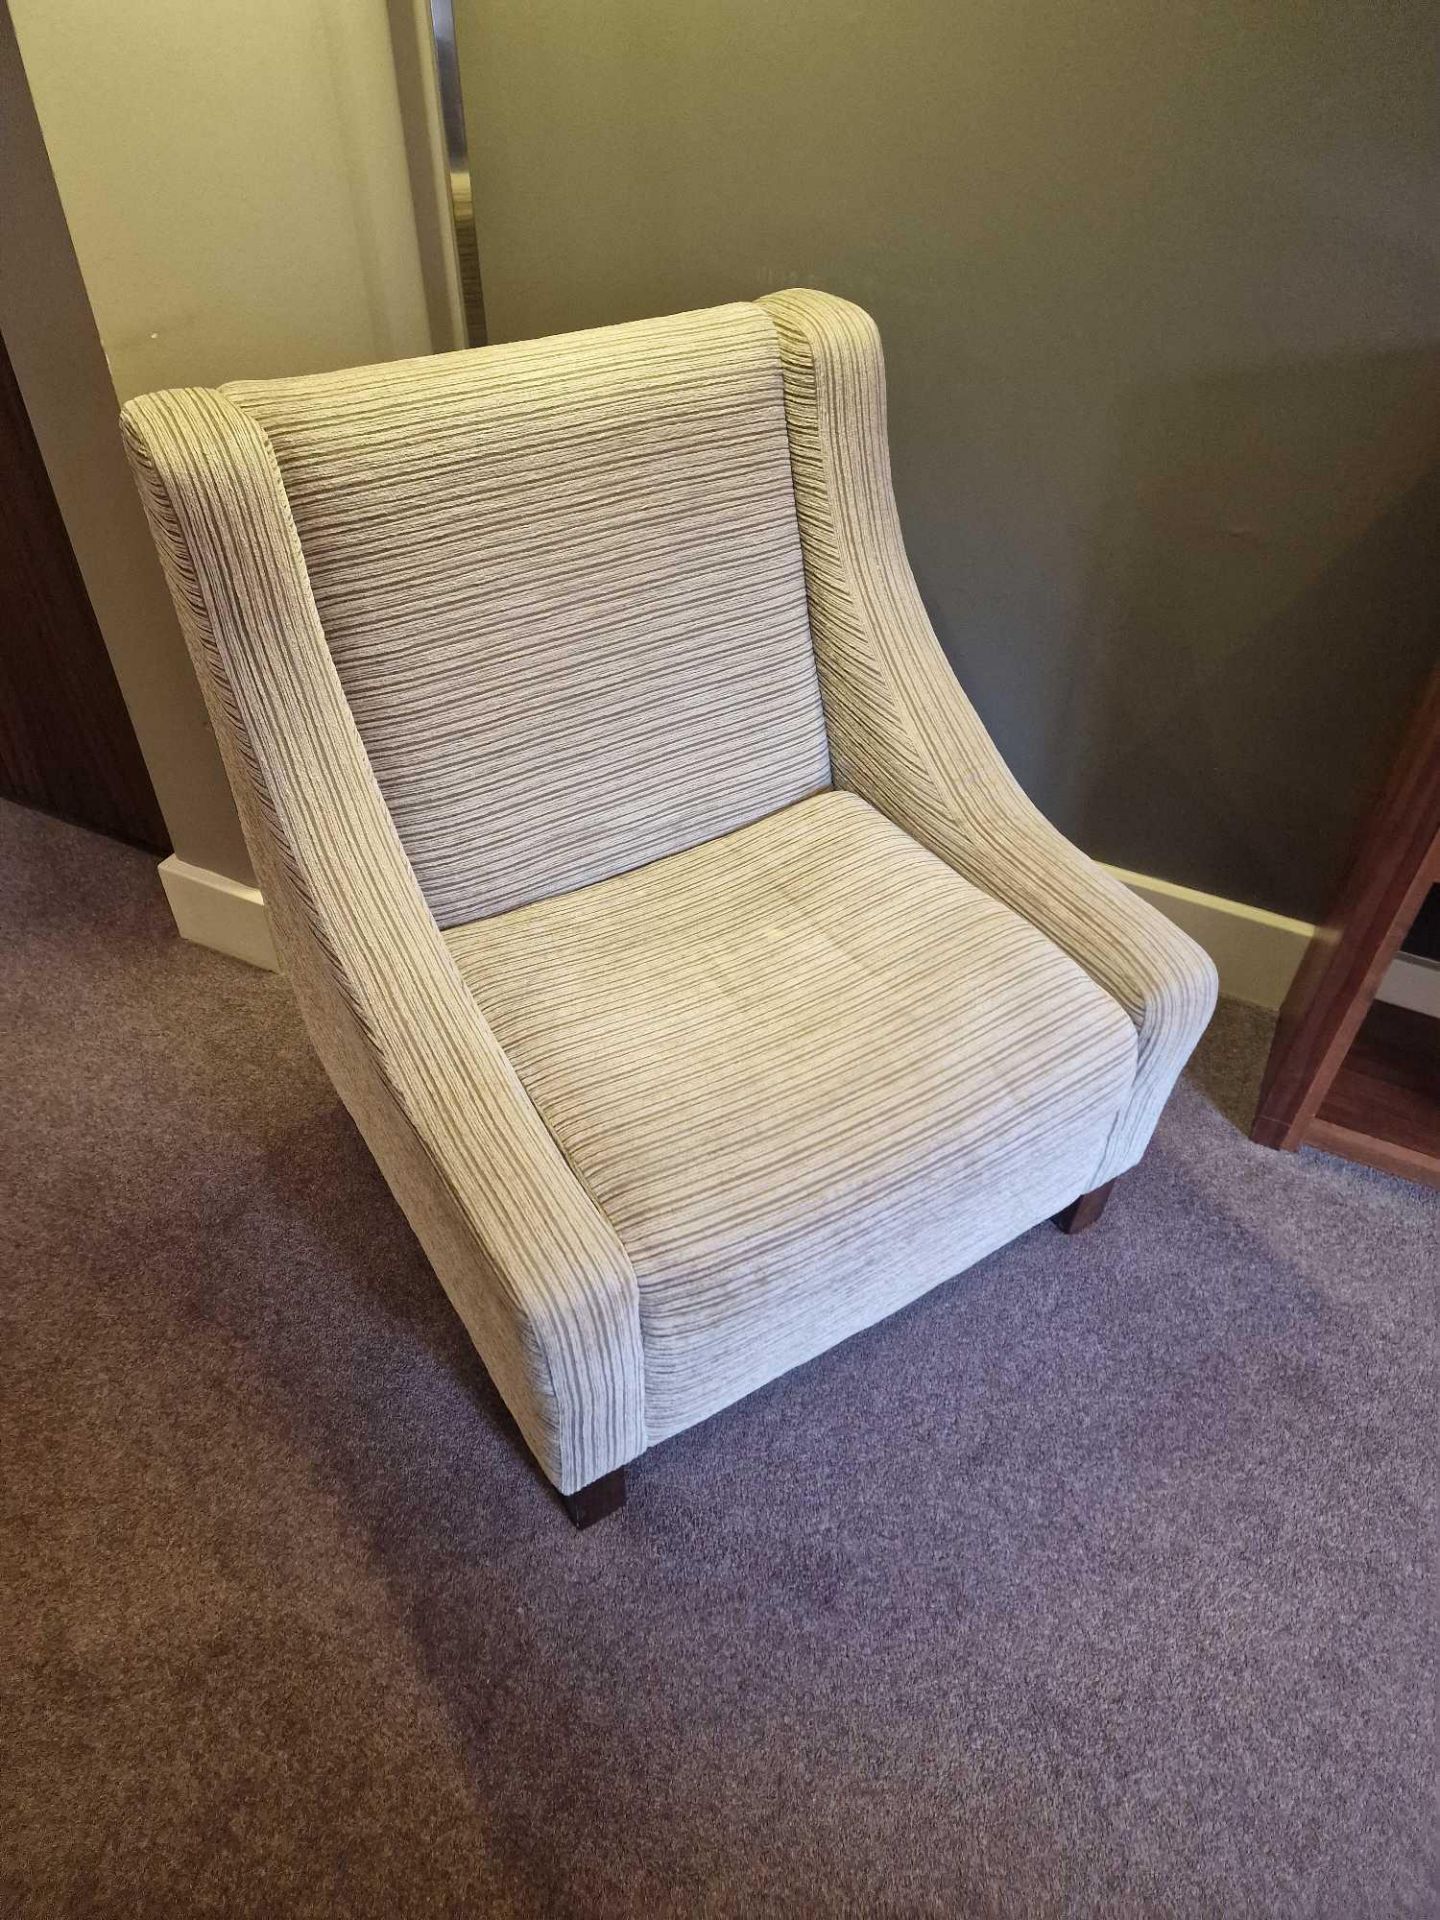 An upholstered relaxer chair 78 x 54 x 86cm ( Location : 205)